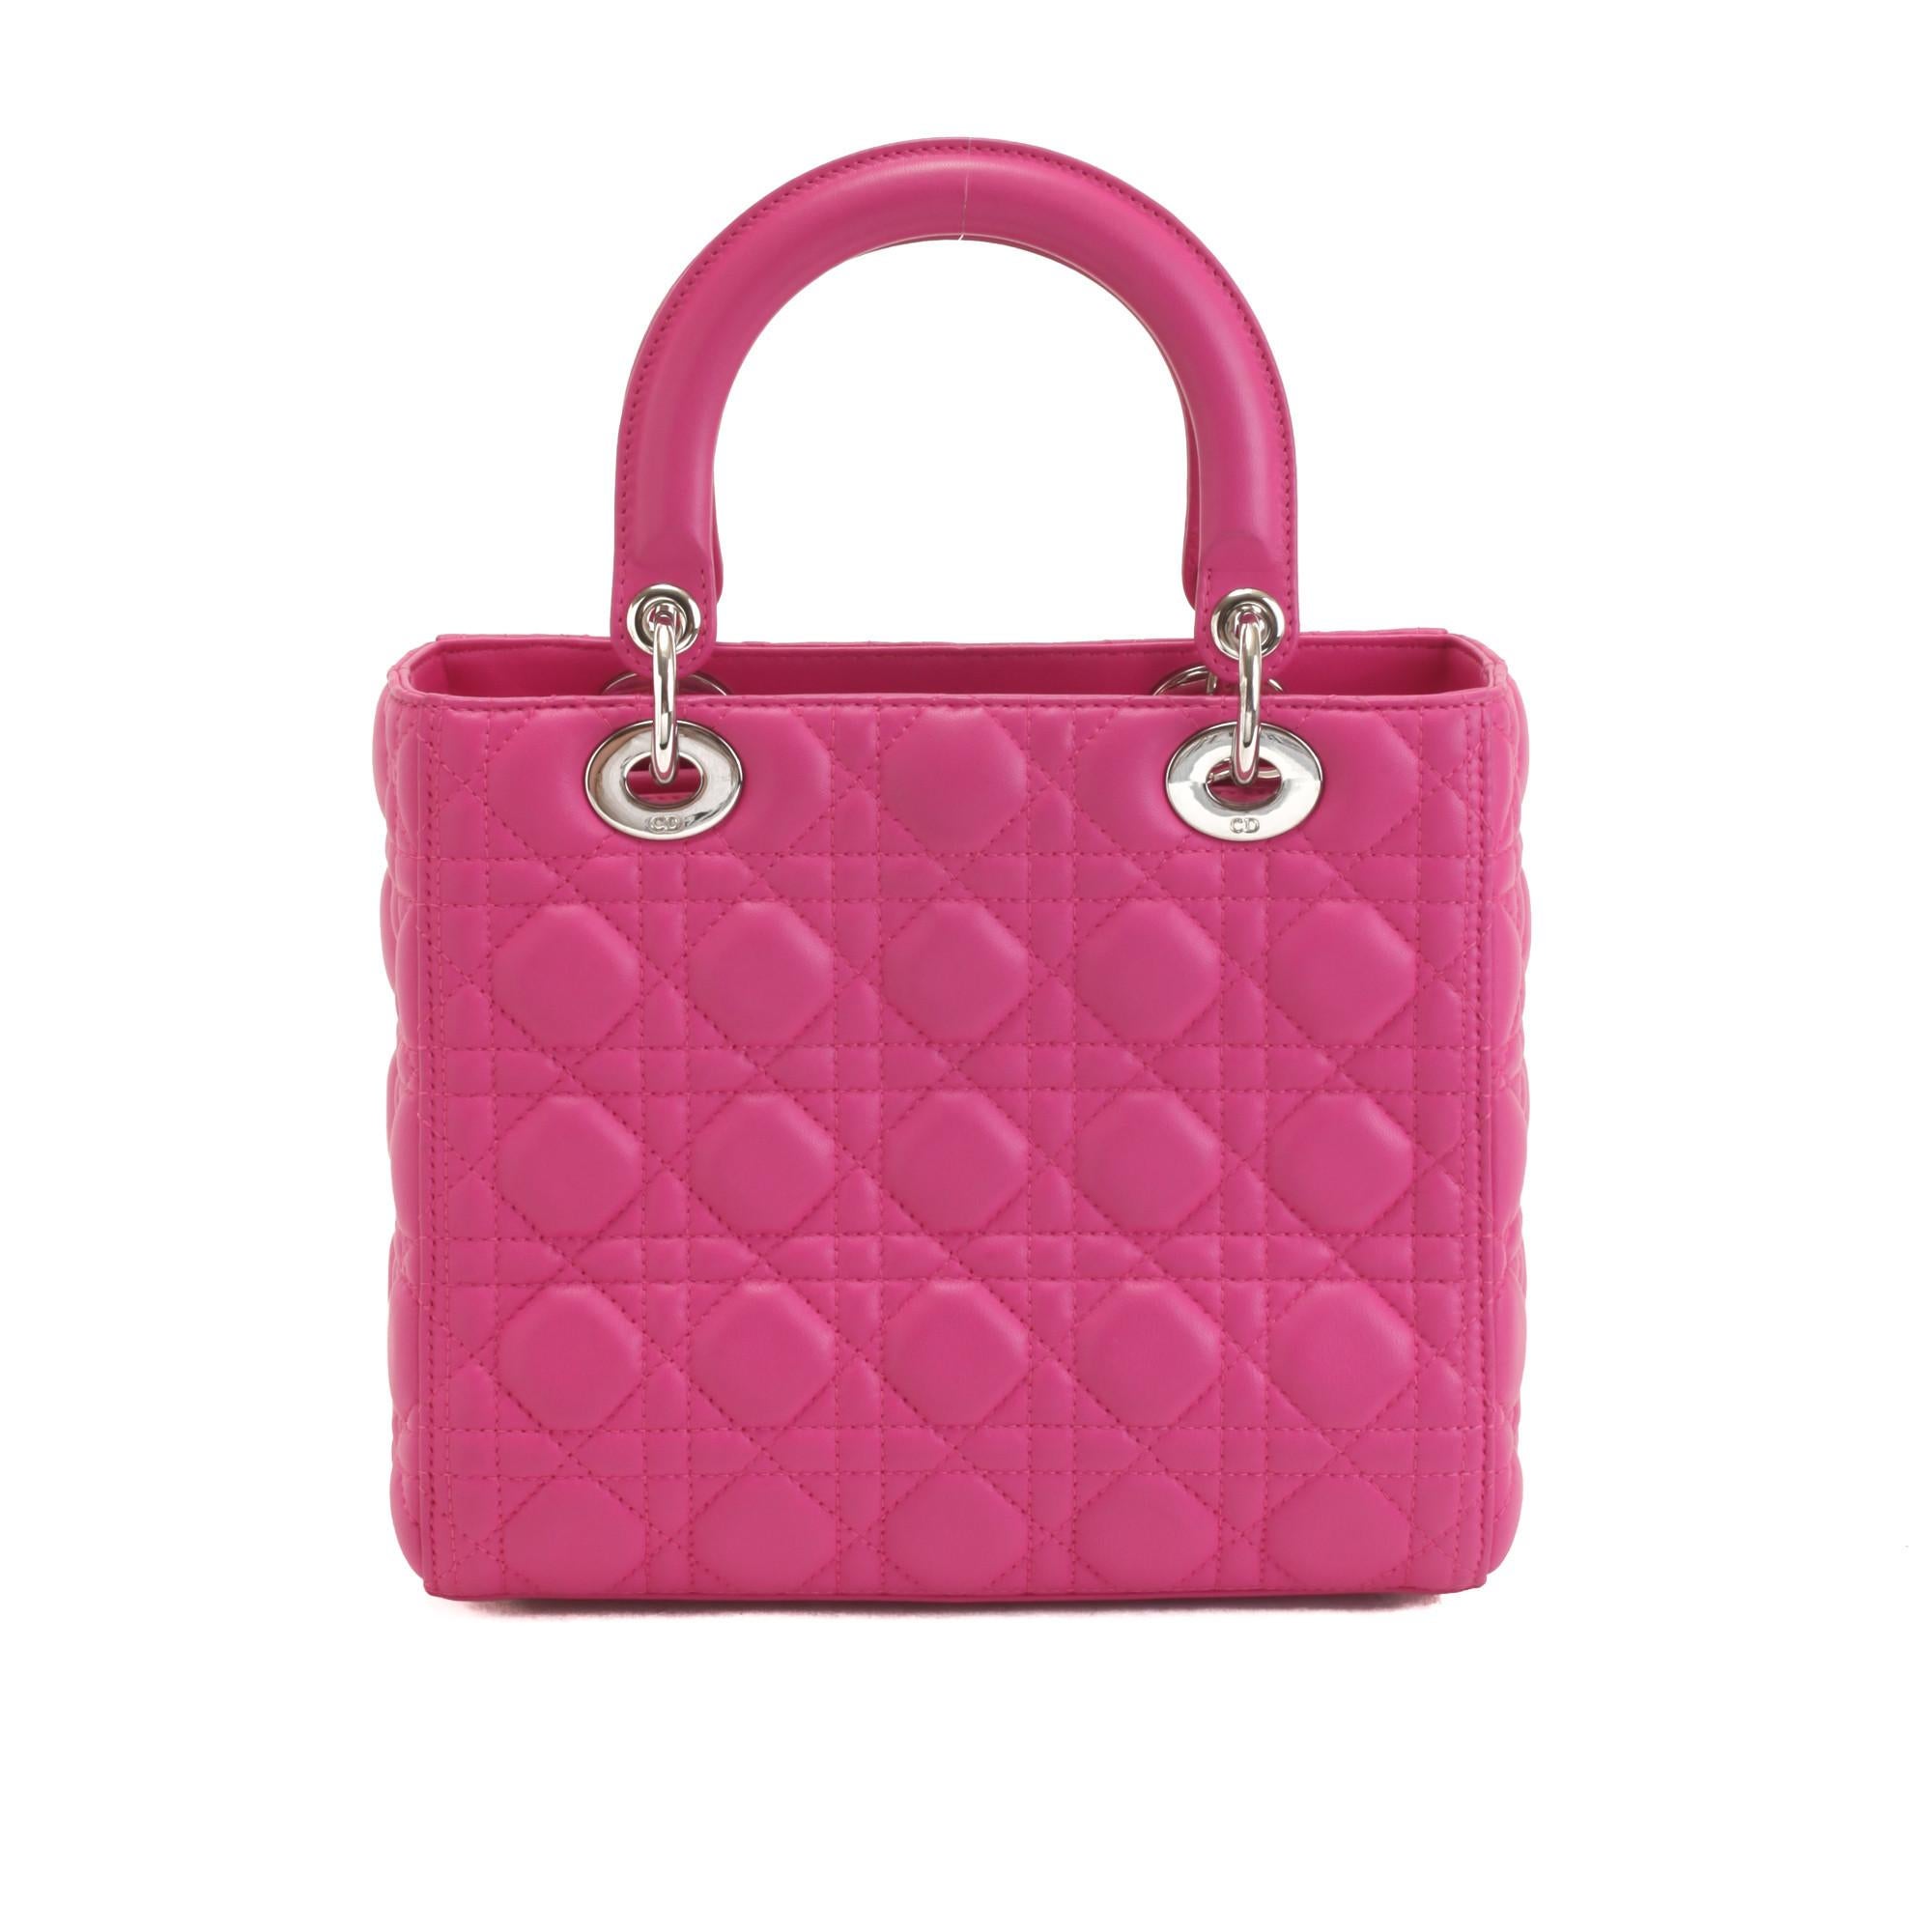 Hot pink quilted Cannage leather Christian Dior Lady Dior 2Way bag with silver-tone hardware, two flat top handles, a DIOR bag charm, a removable shoulder strap and a zip top closure. The interior is crafted in black Cannage jacquard lining with one